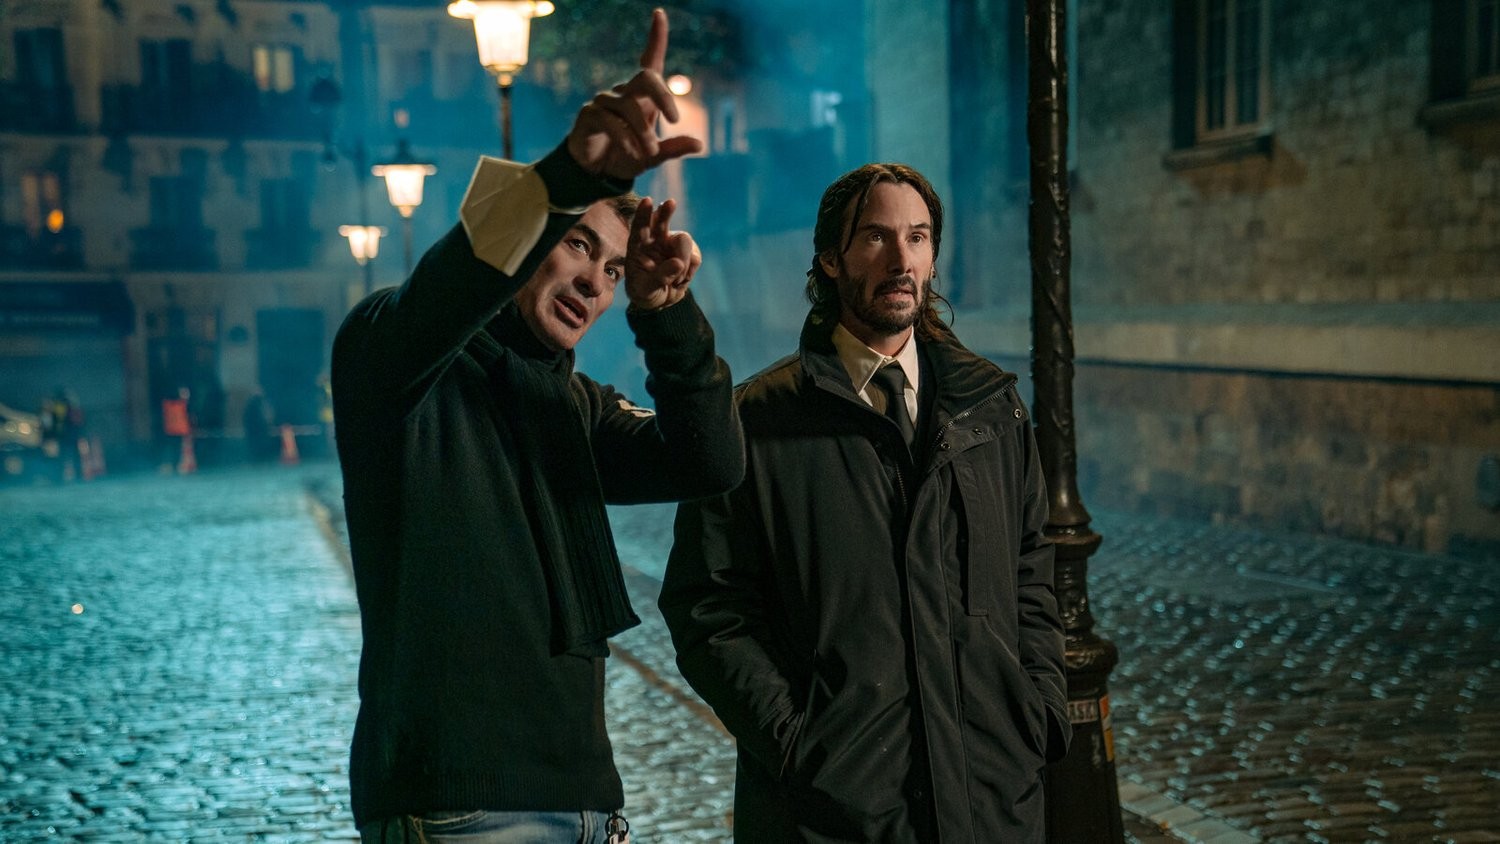 Chad Stahelski and Keanu Reeves on the sets of John Wick